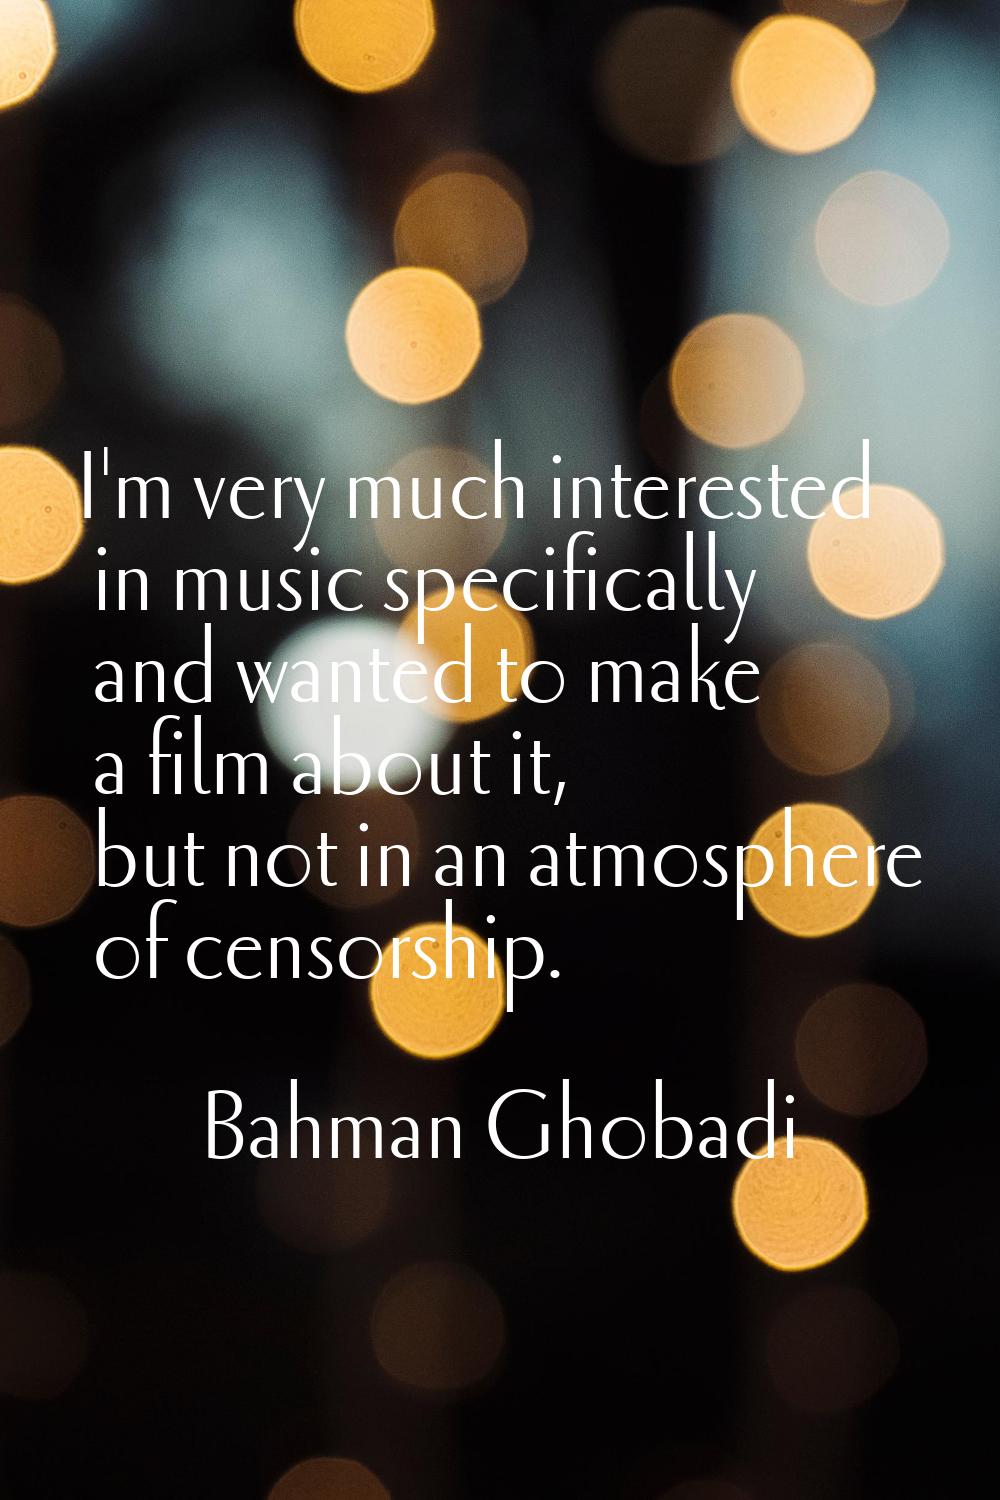 I'm very much interested in music specifically and wanted to make a film about it, but not in an at